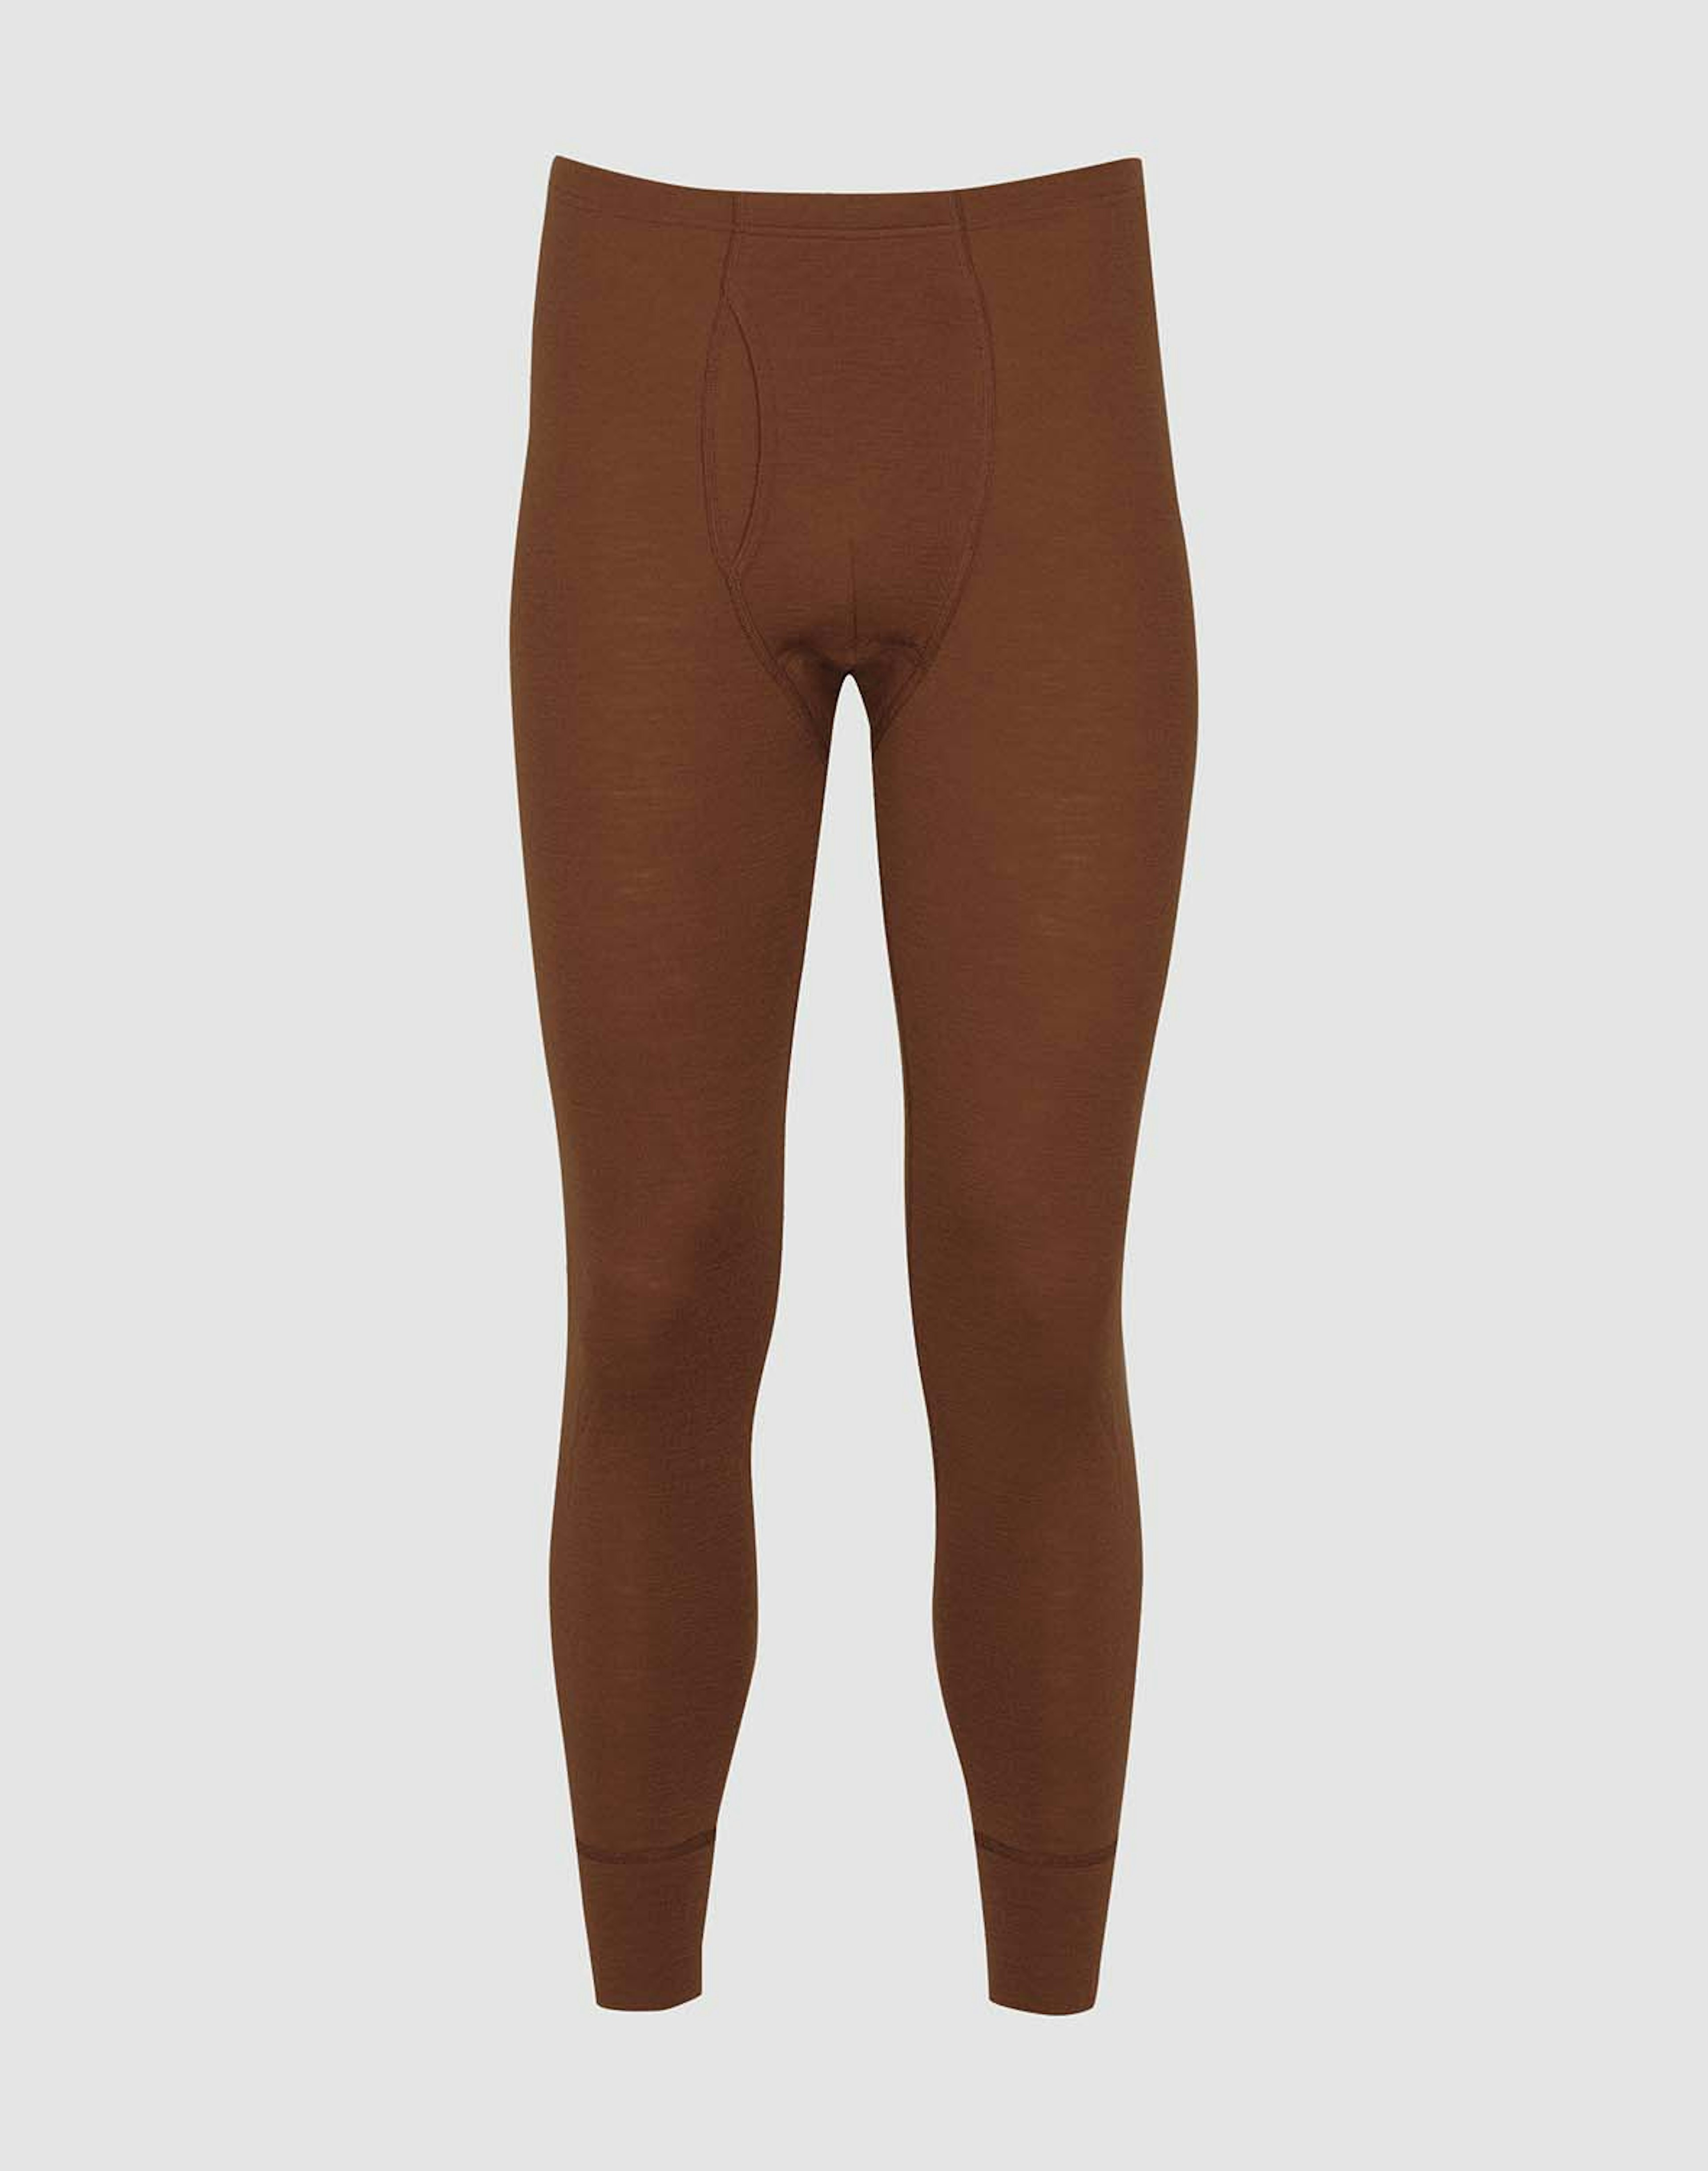 Men's merino wool long johns with fly Copper brown